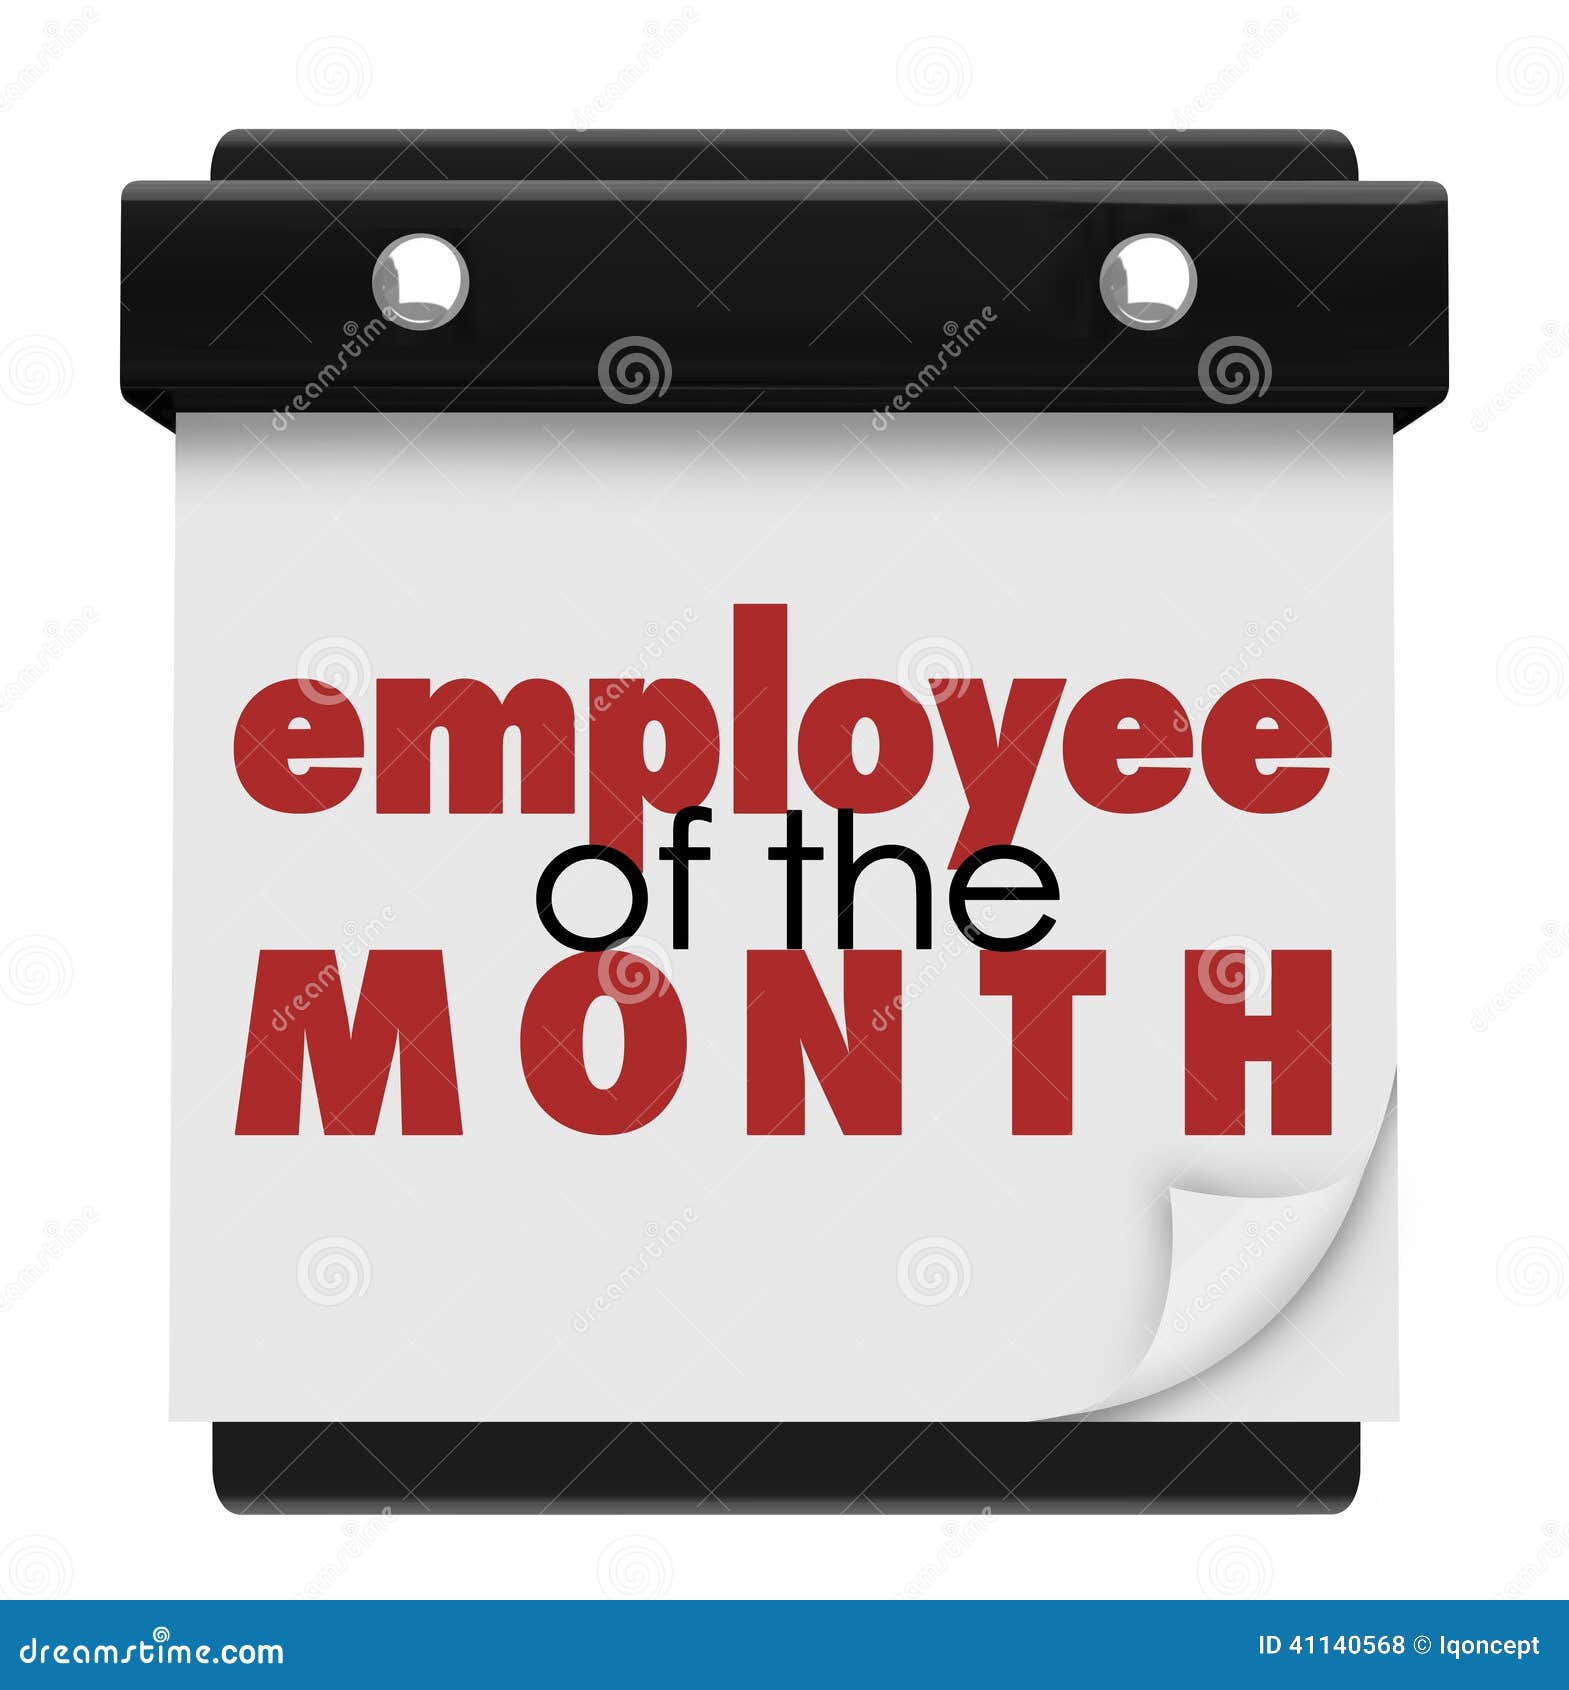 employee of the month clip art - photo #25